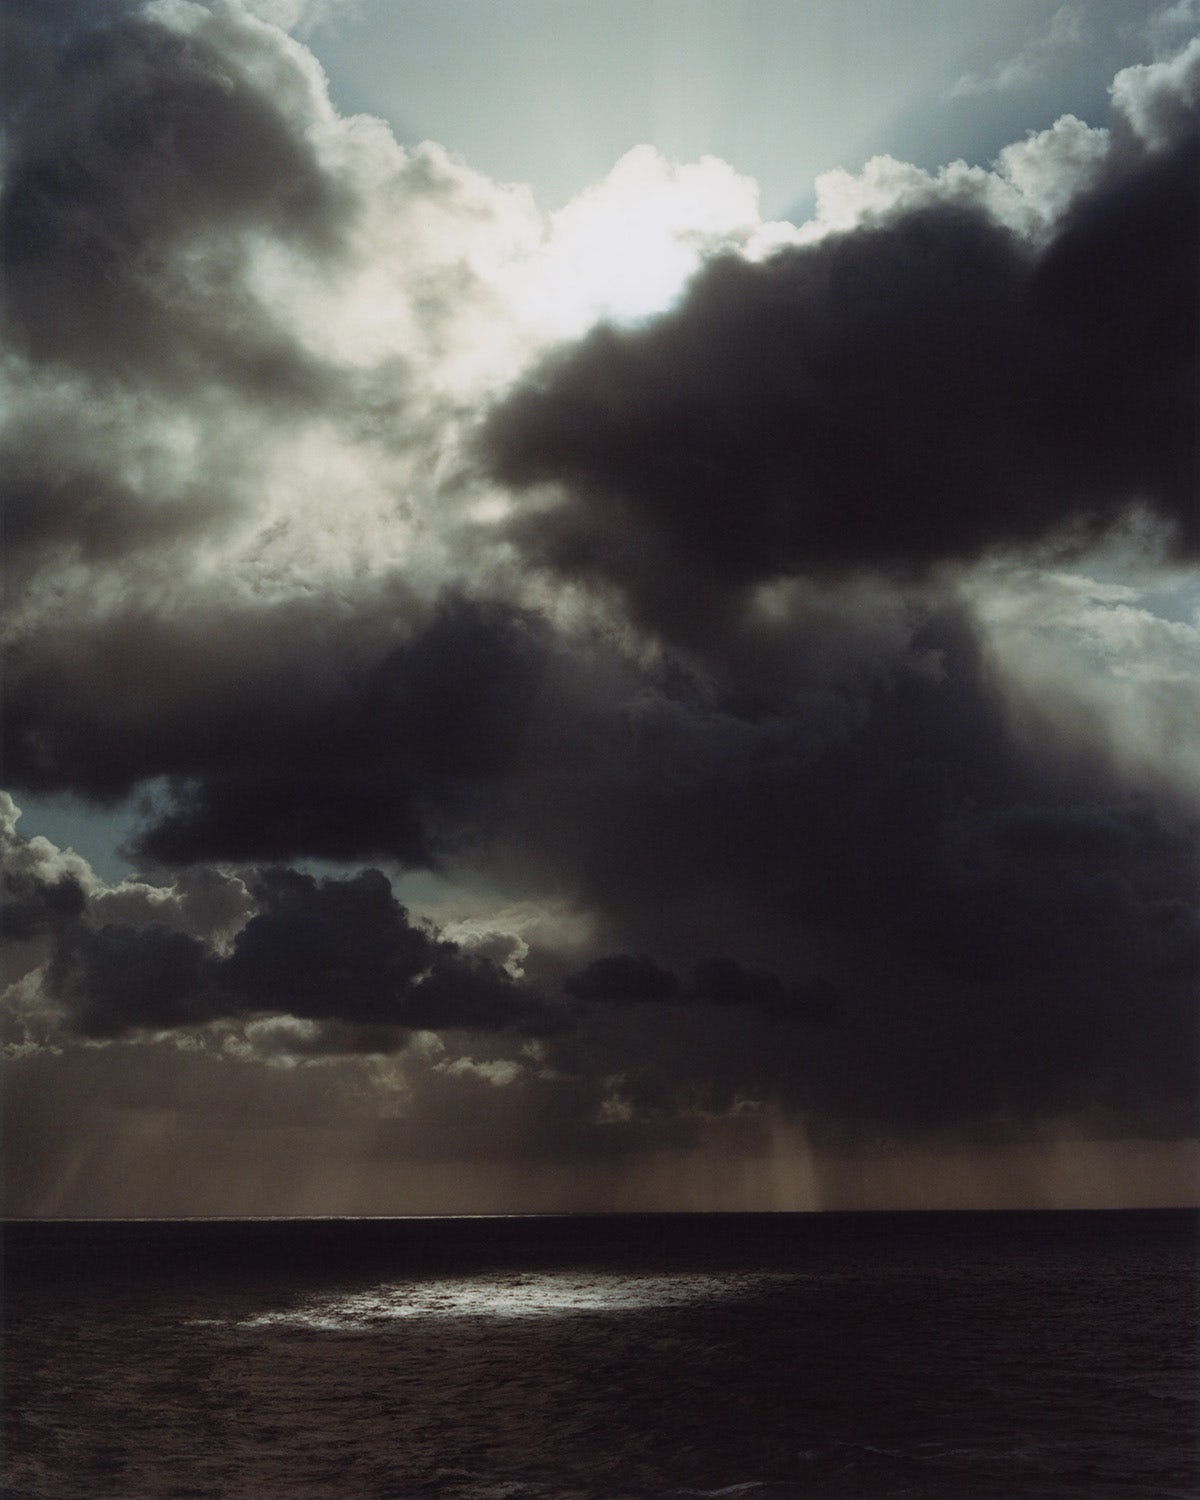 Photograph from Folly by Jamie Murray showing the sea with clouds overhead, with the sun piercing through one, leaving a beam of light on the sea